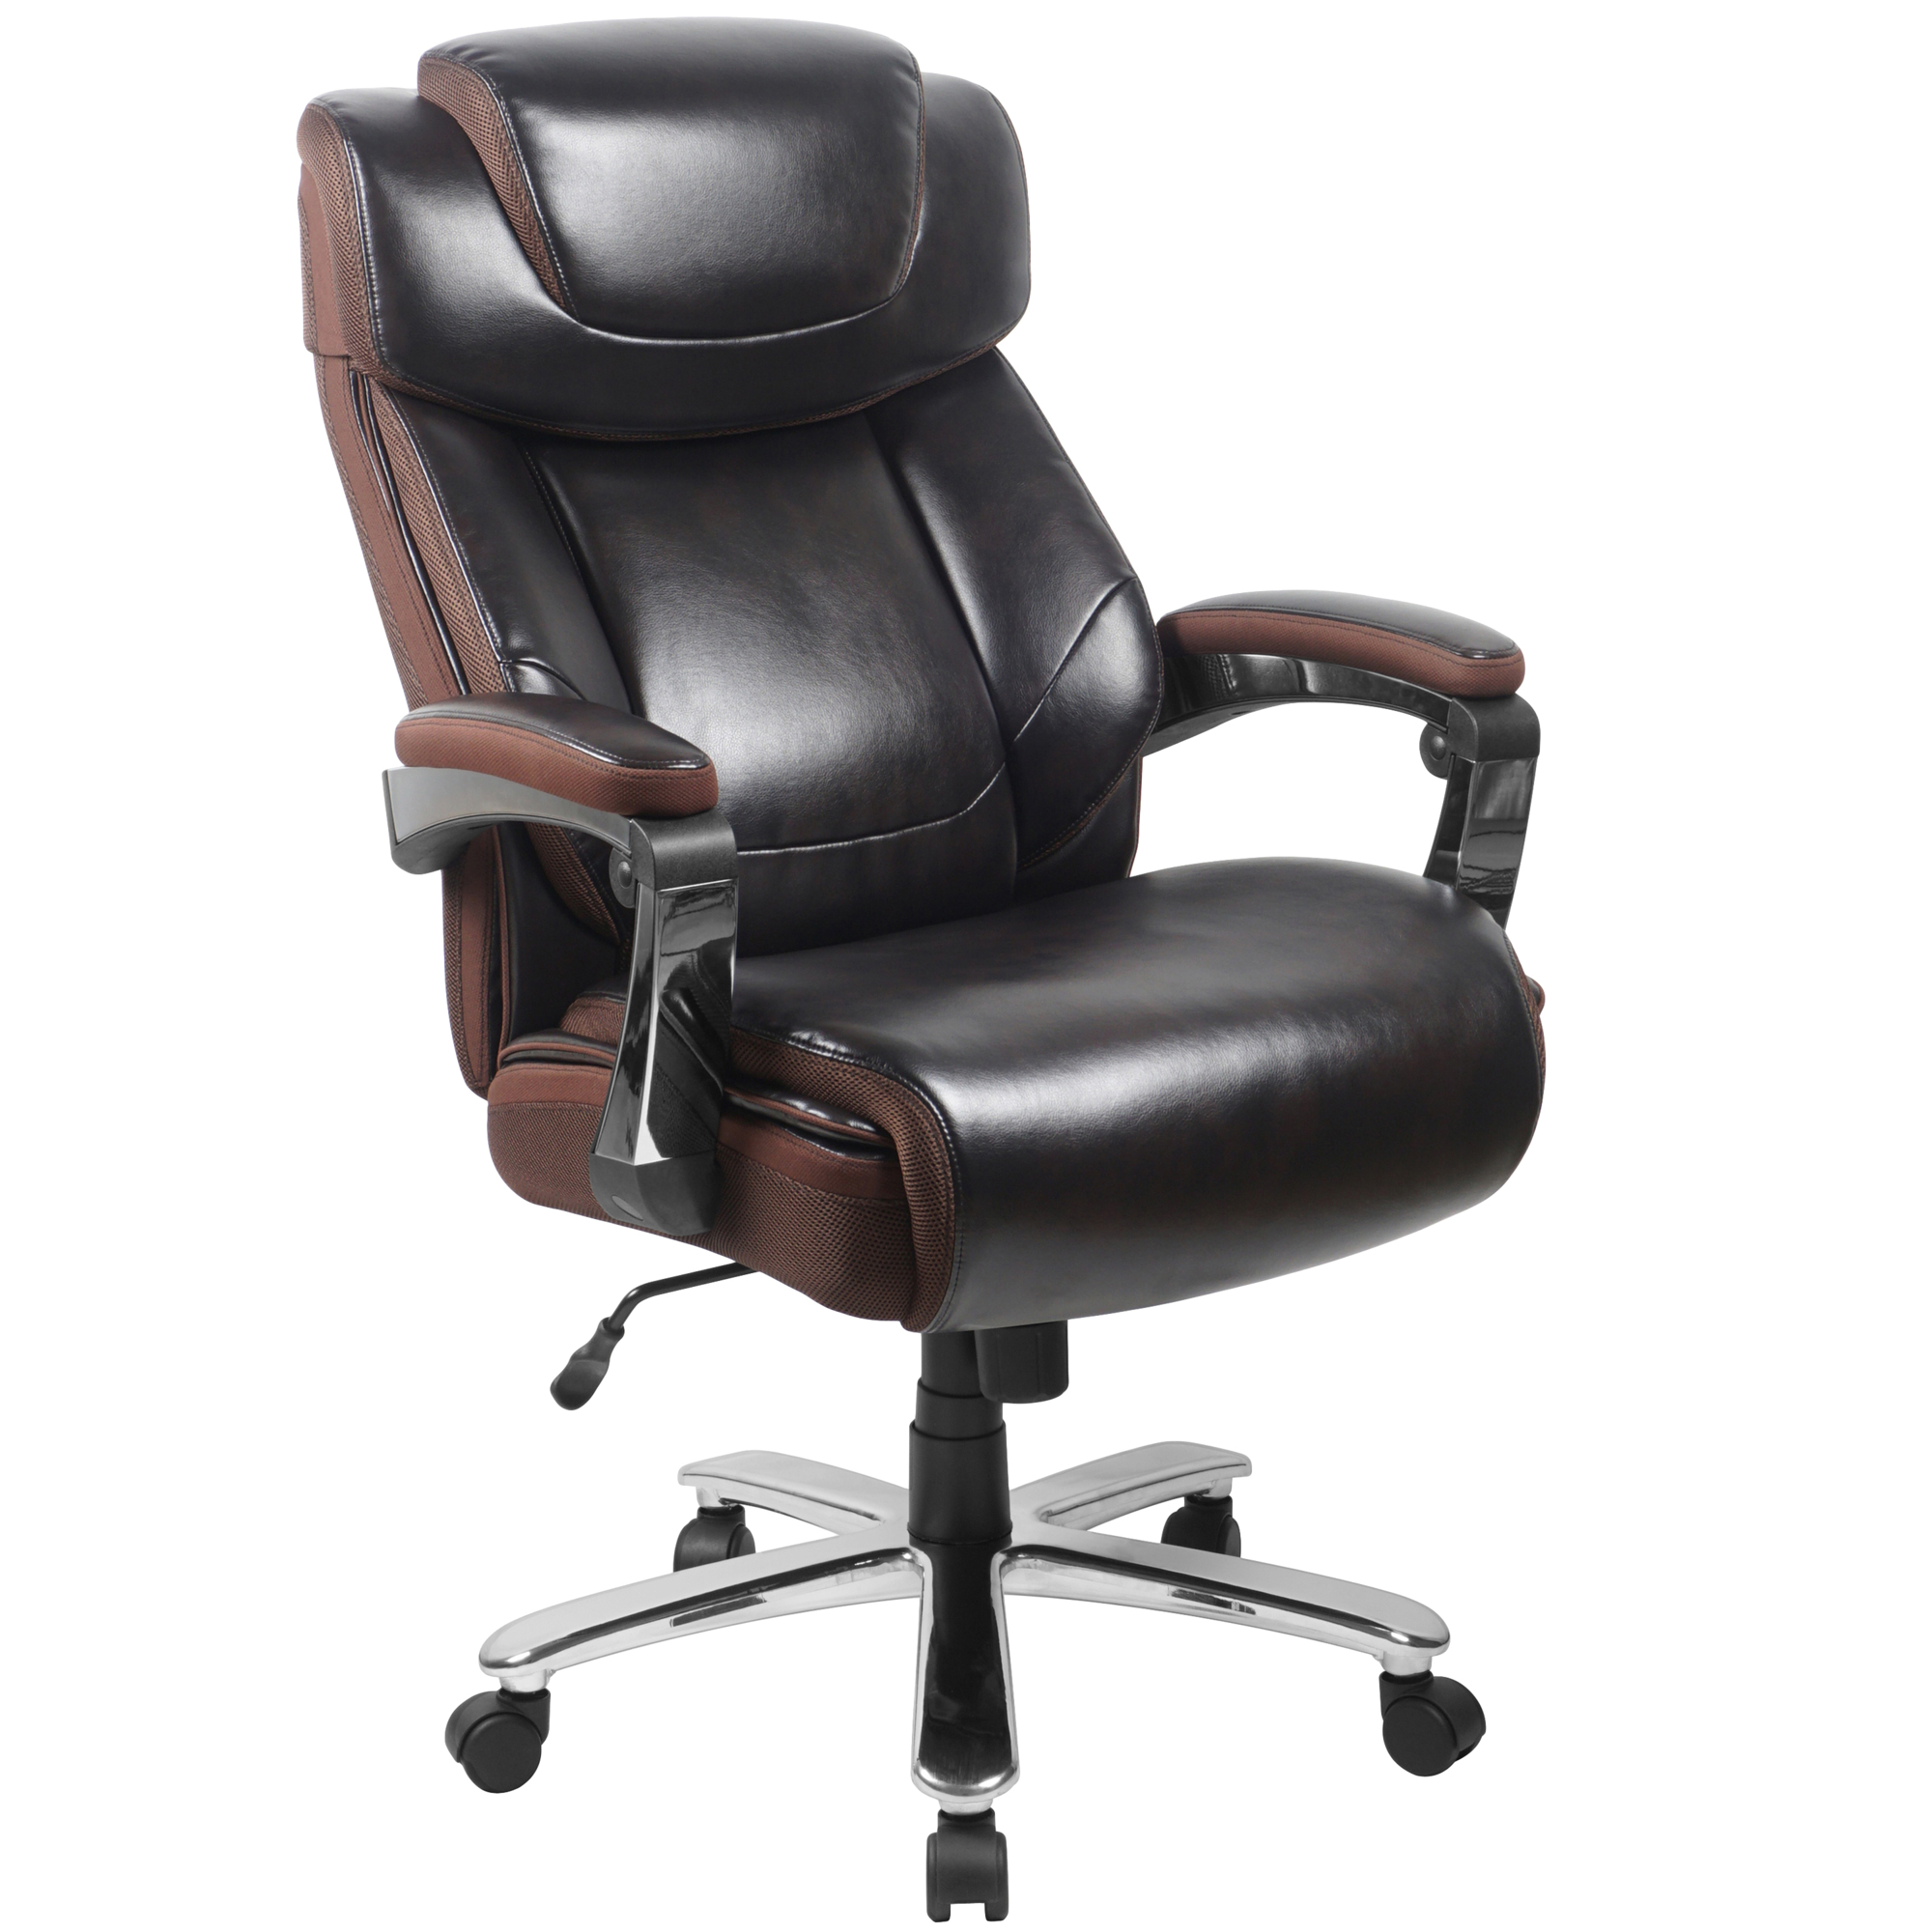 Flash Furniture, 500 lb. Rated Brown LeatherSoft Ergonomic Chair, Primary Color Brown, Included (qty.) 1, Model GO2223BN